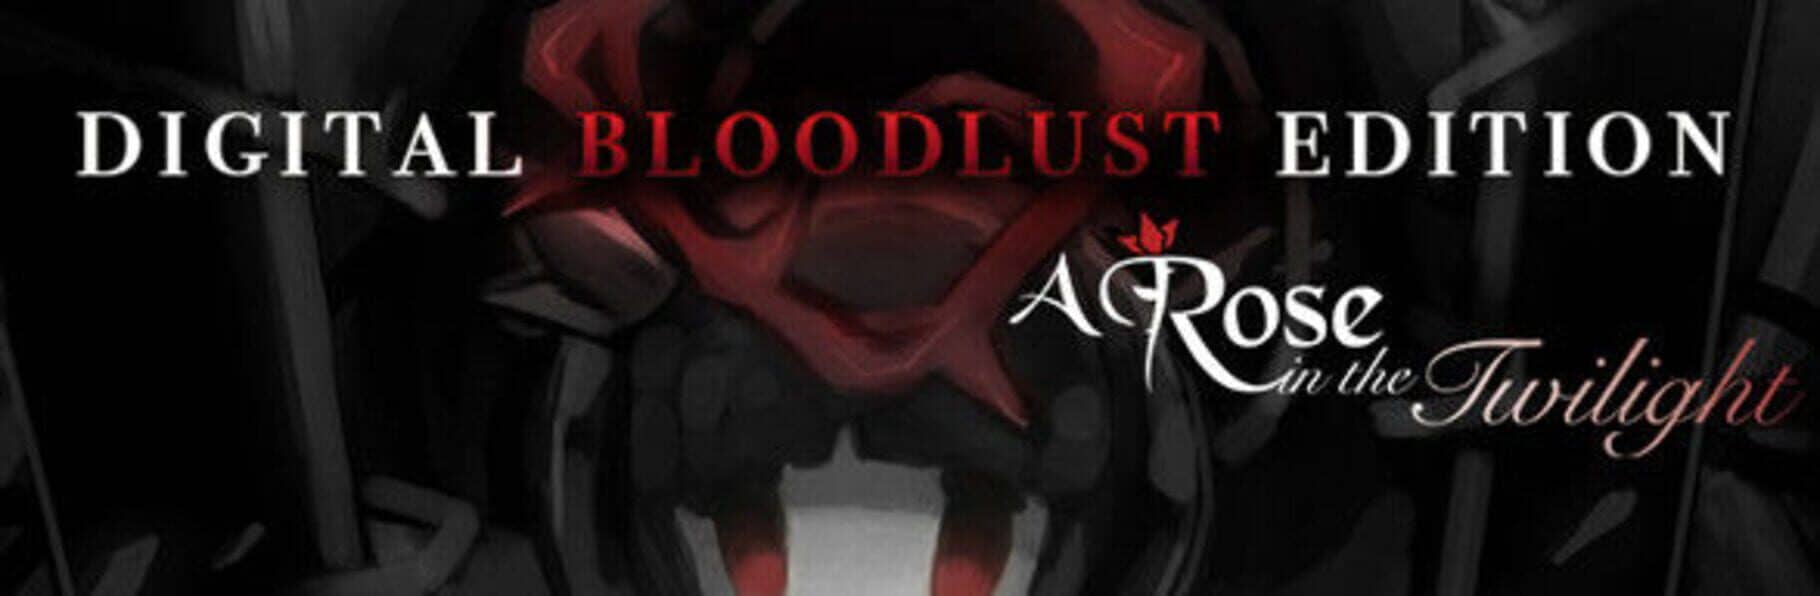 A Rose in the Twilight Digital Bloodlust Edition